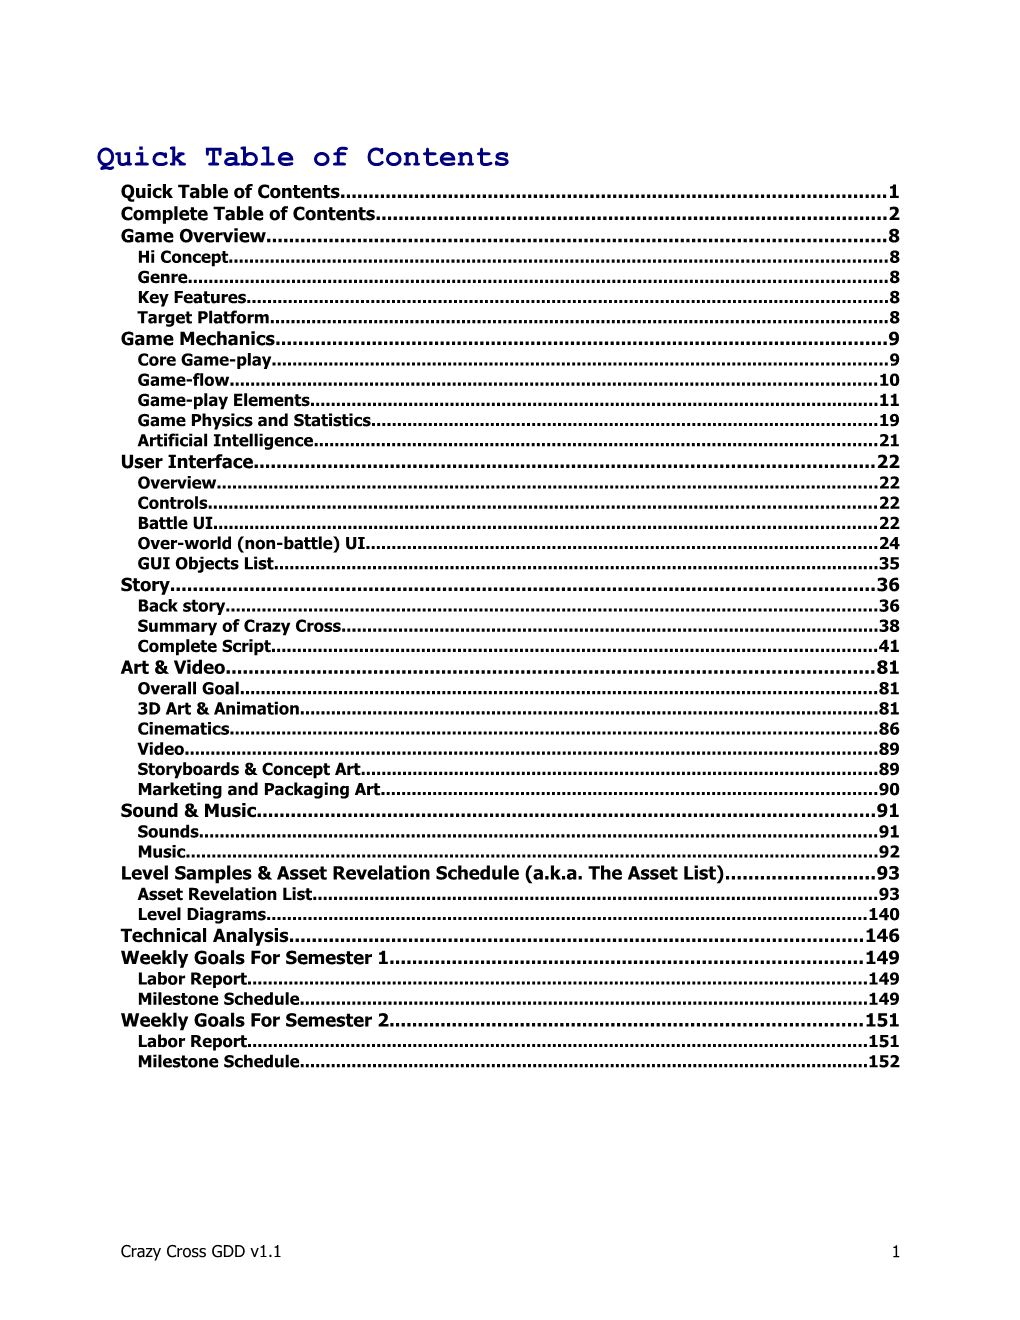 Quick Table of Contents s1